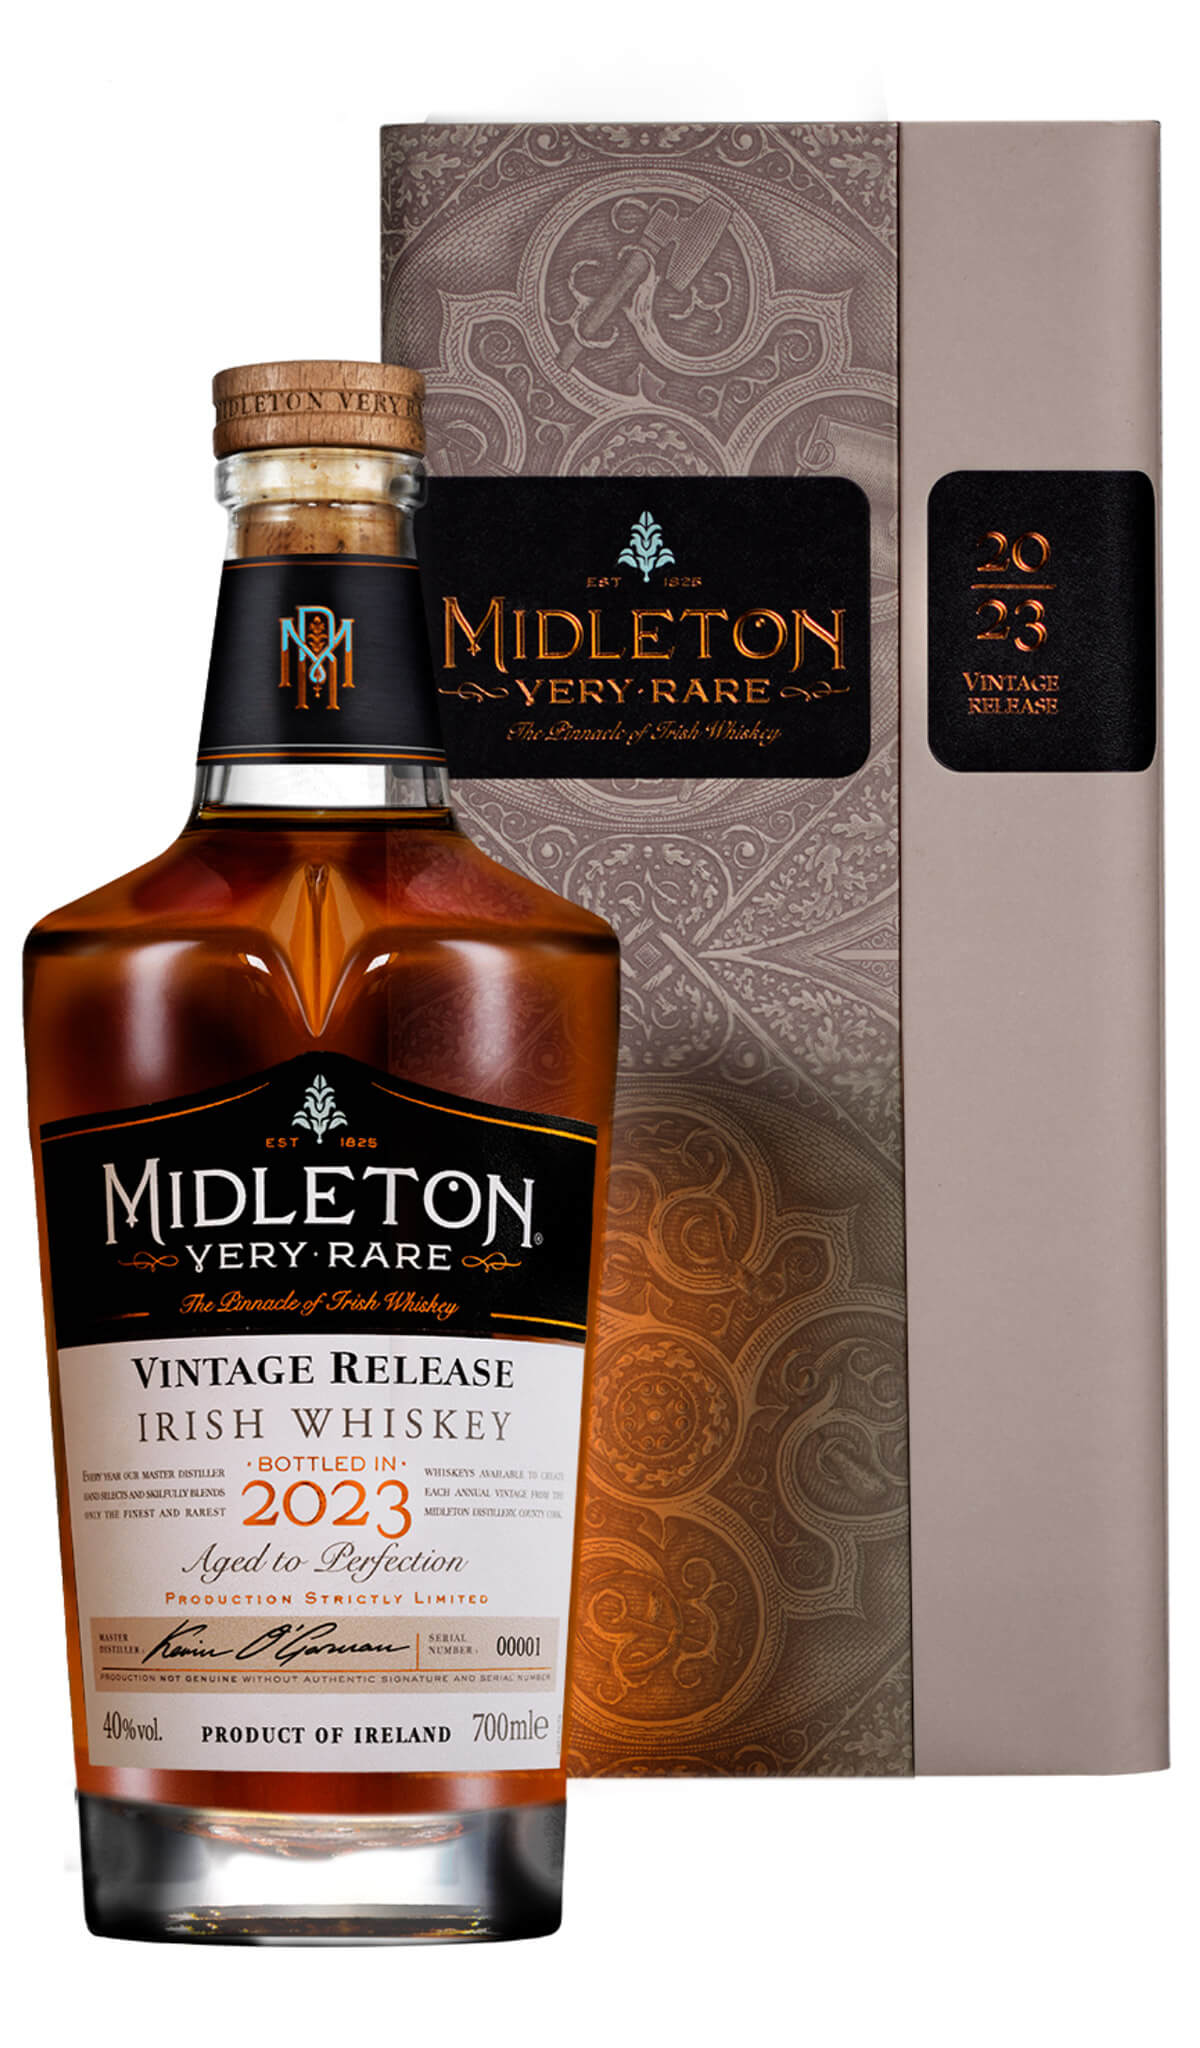 Find out more or buy Midleton Very Rare Vintage Release 2023 Irish Whiskey 700mL online at Wine Sellers Direct - Australia’s independent liquor specialists.